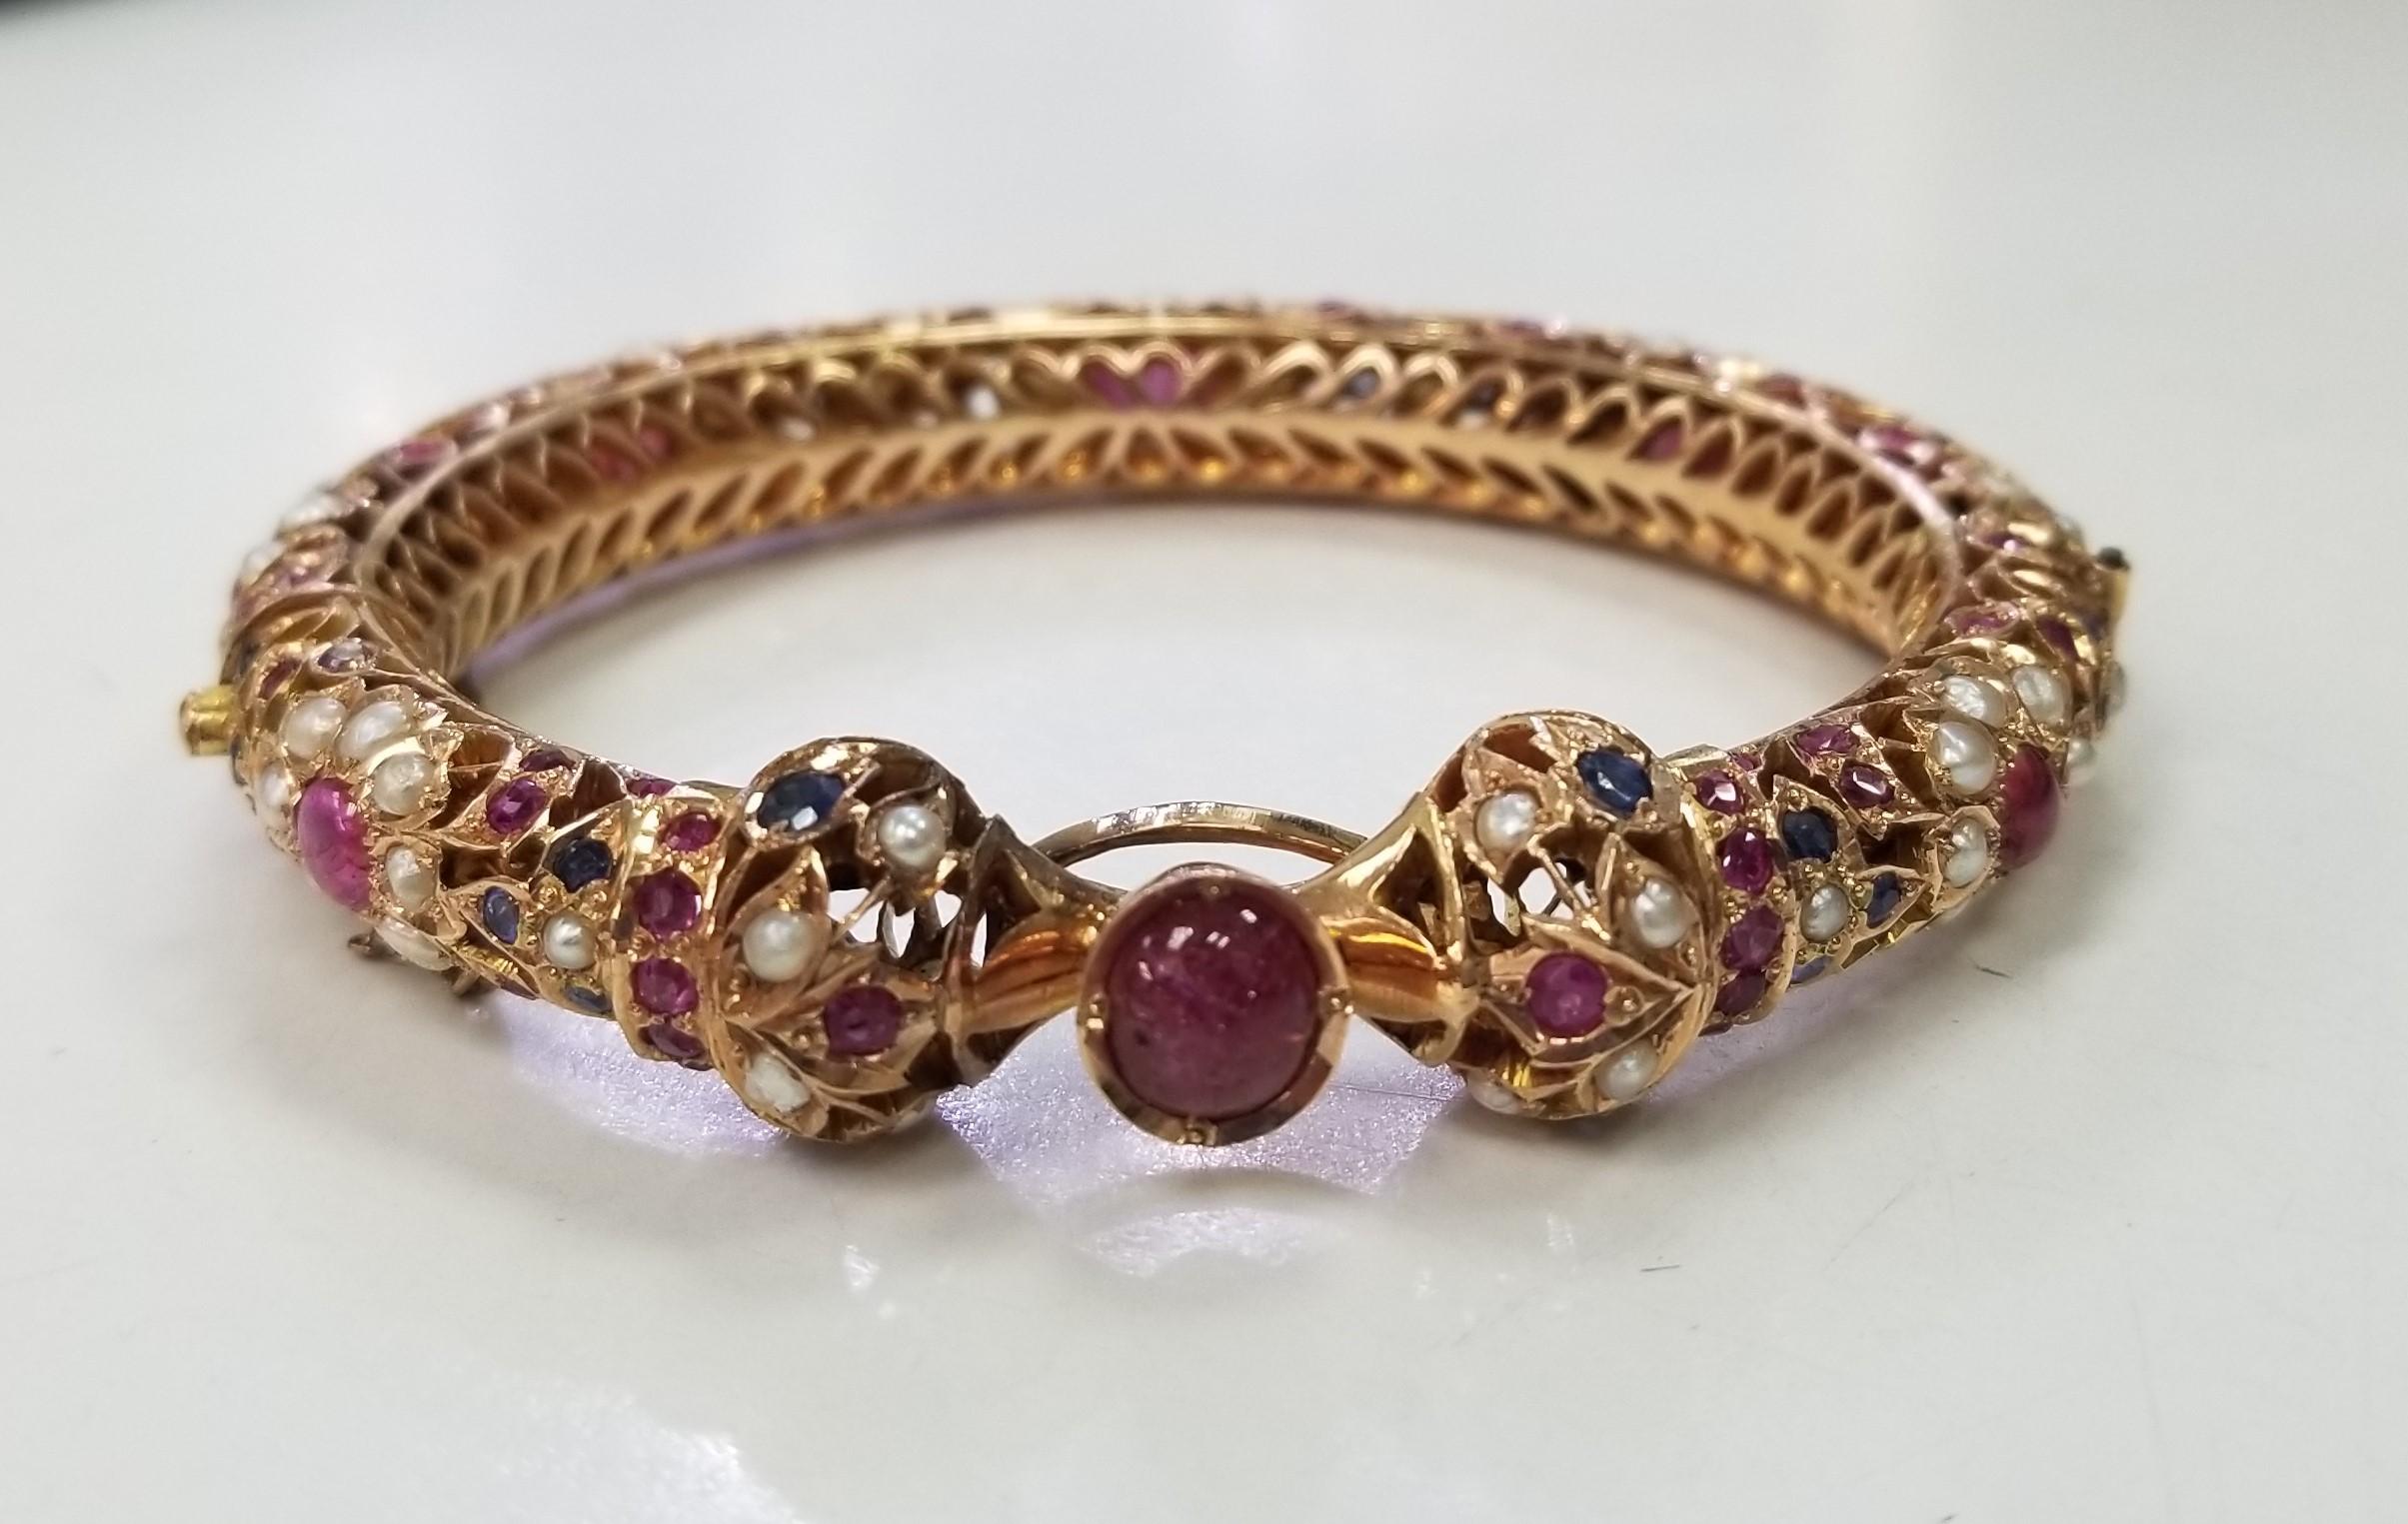 This exquisite Bracelet boasts a delicate filigree design crafted in 14k gold adorned with dazzling Rubies, Sapphires and Pearls. Its intricate and detailed craftsmanship makes it the perfect choice for a formal event or a special occasion. A true